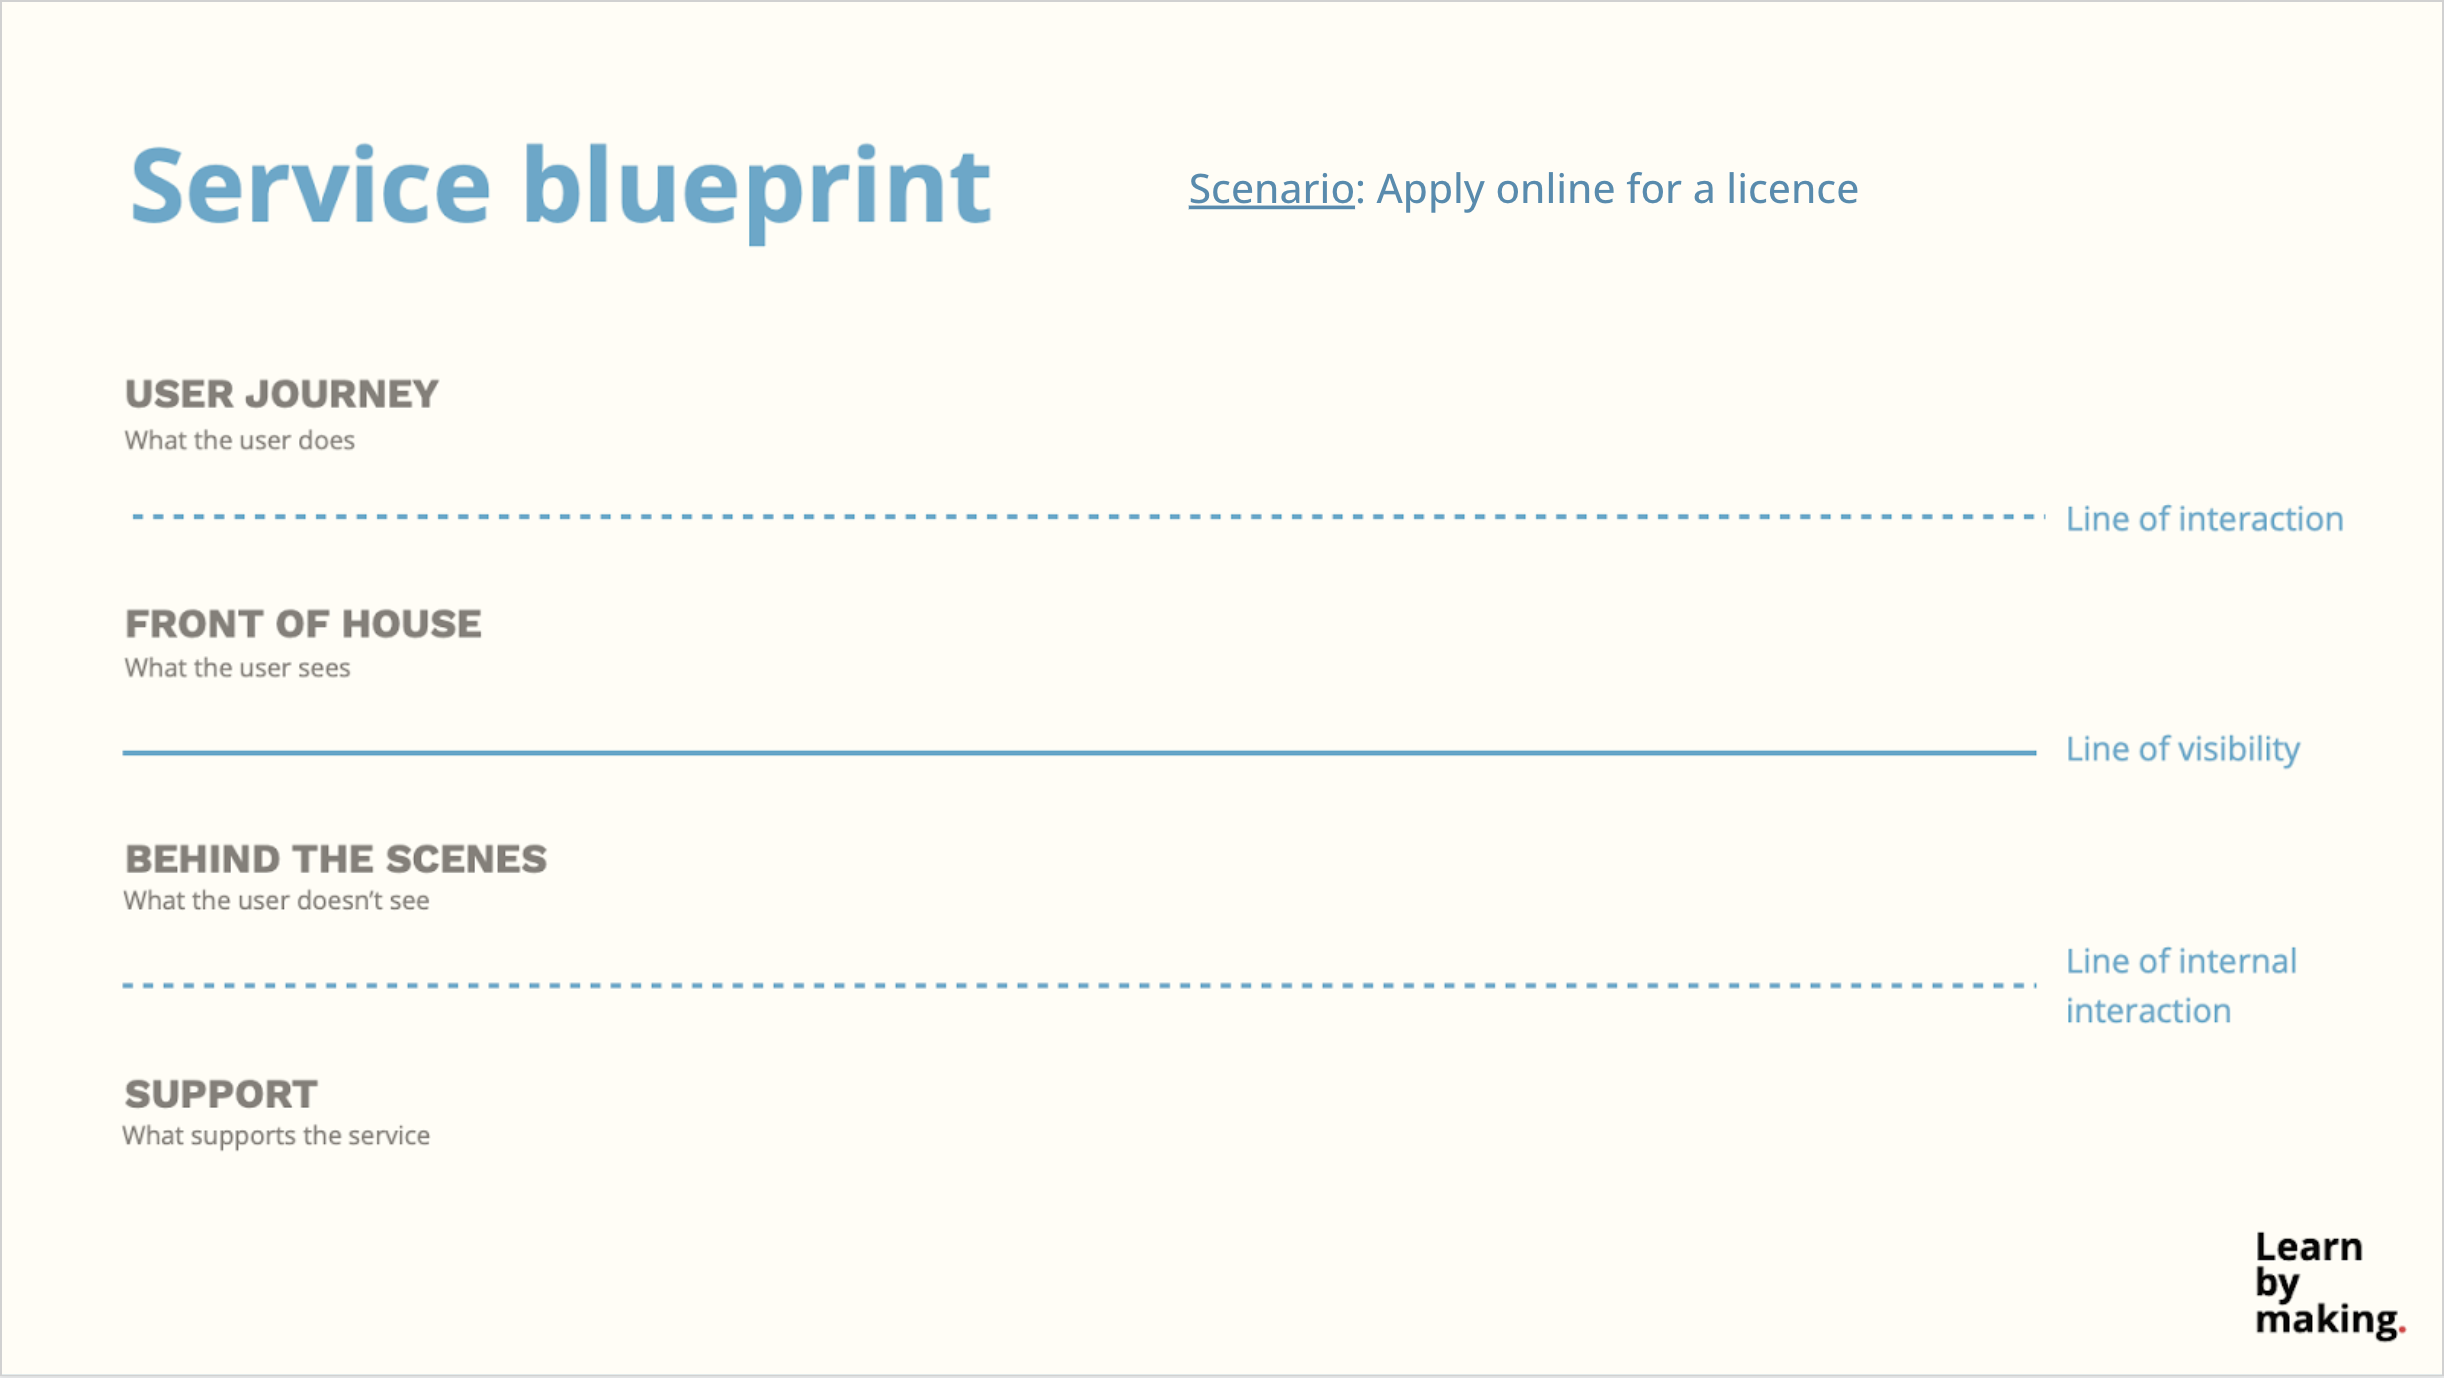 The service blueprint template with the scenario, “Apply online for a licence” written out